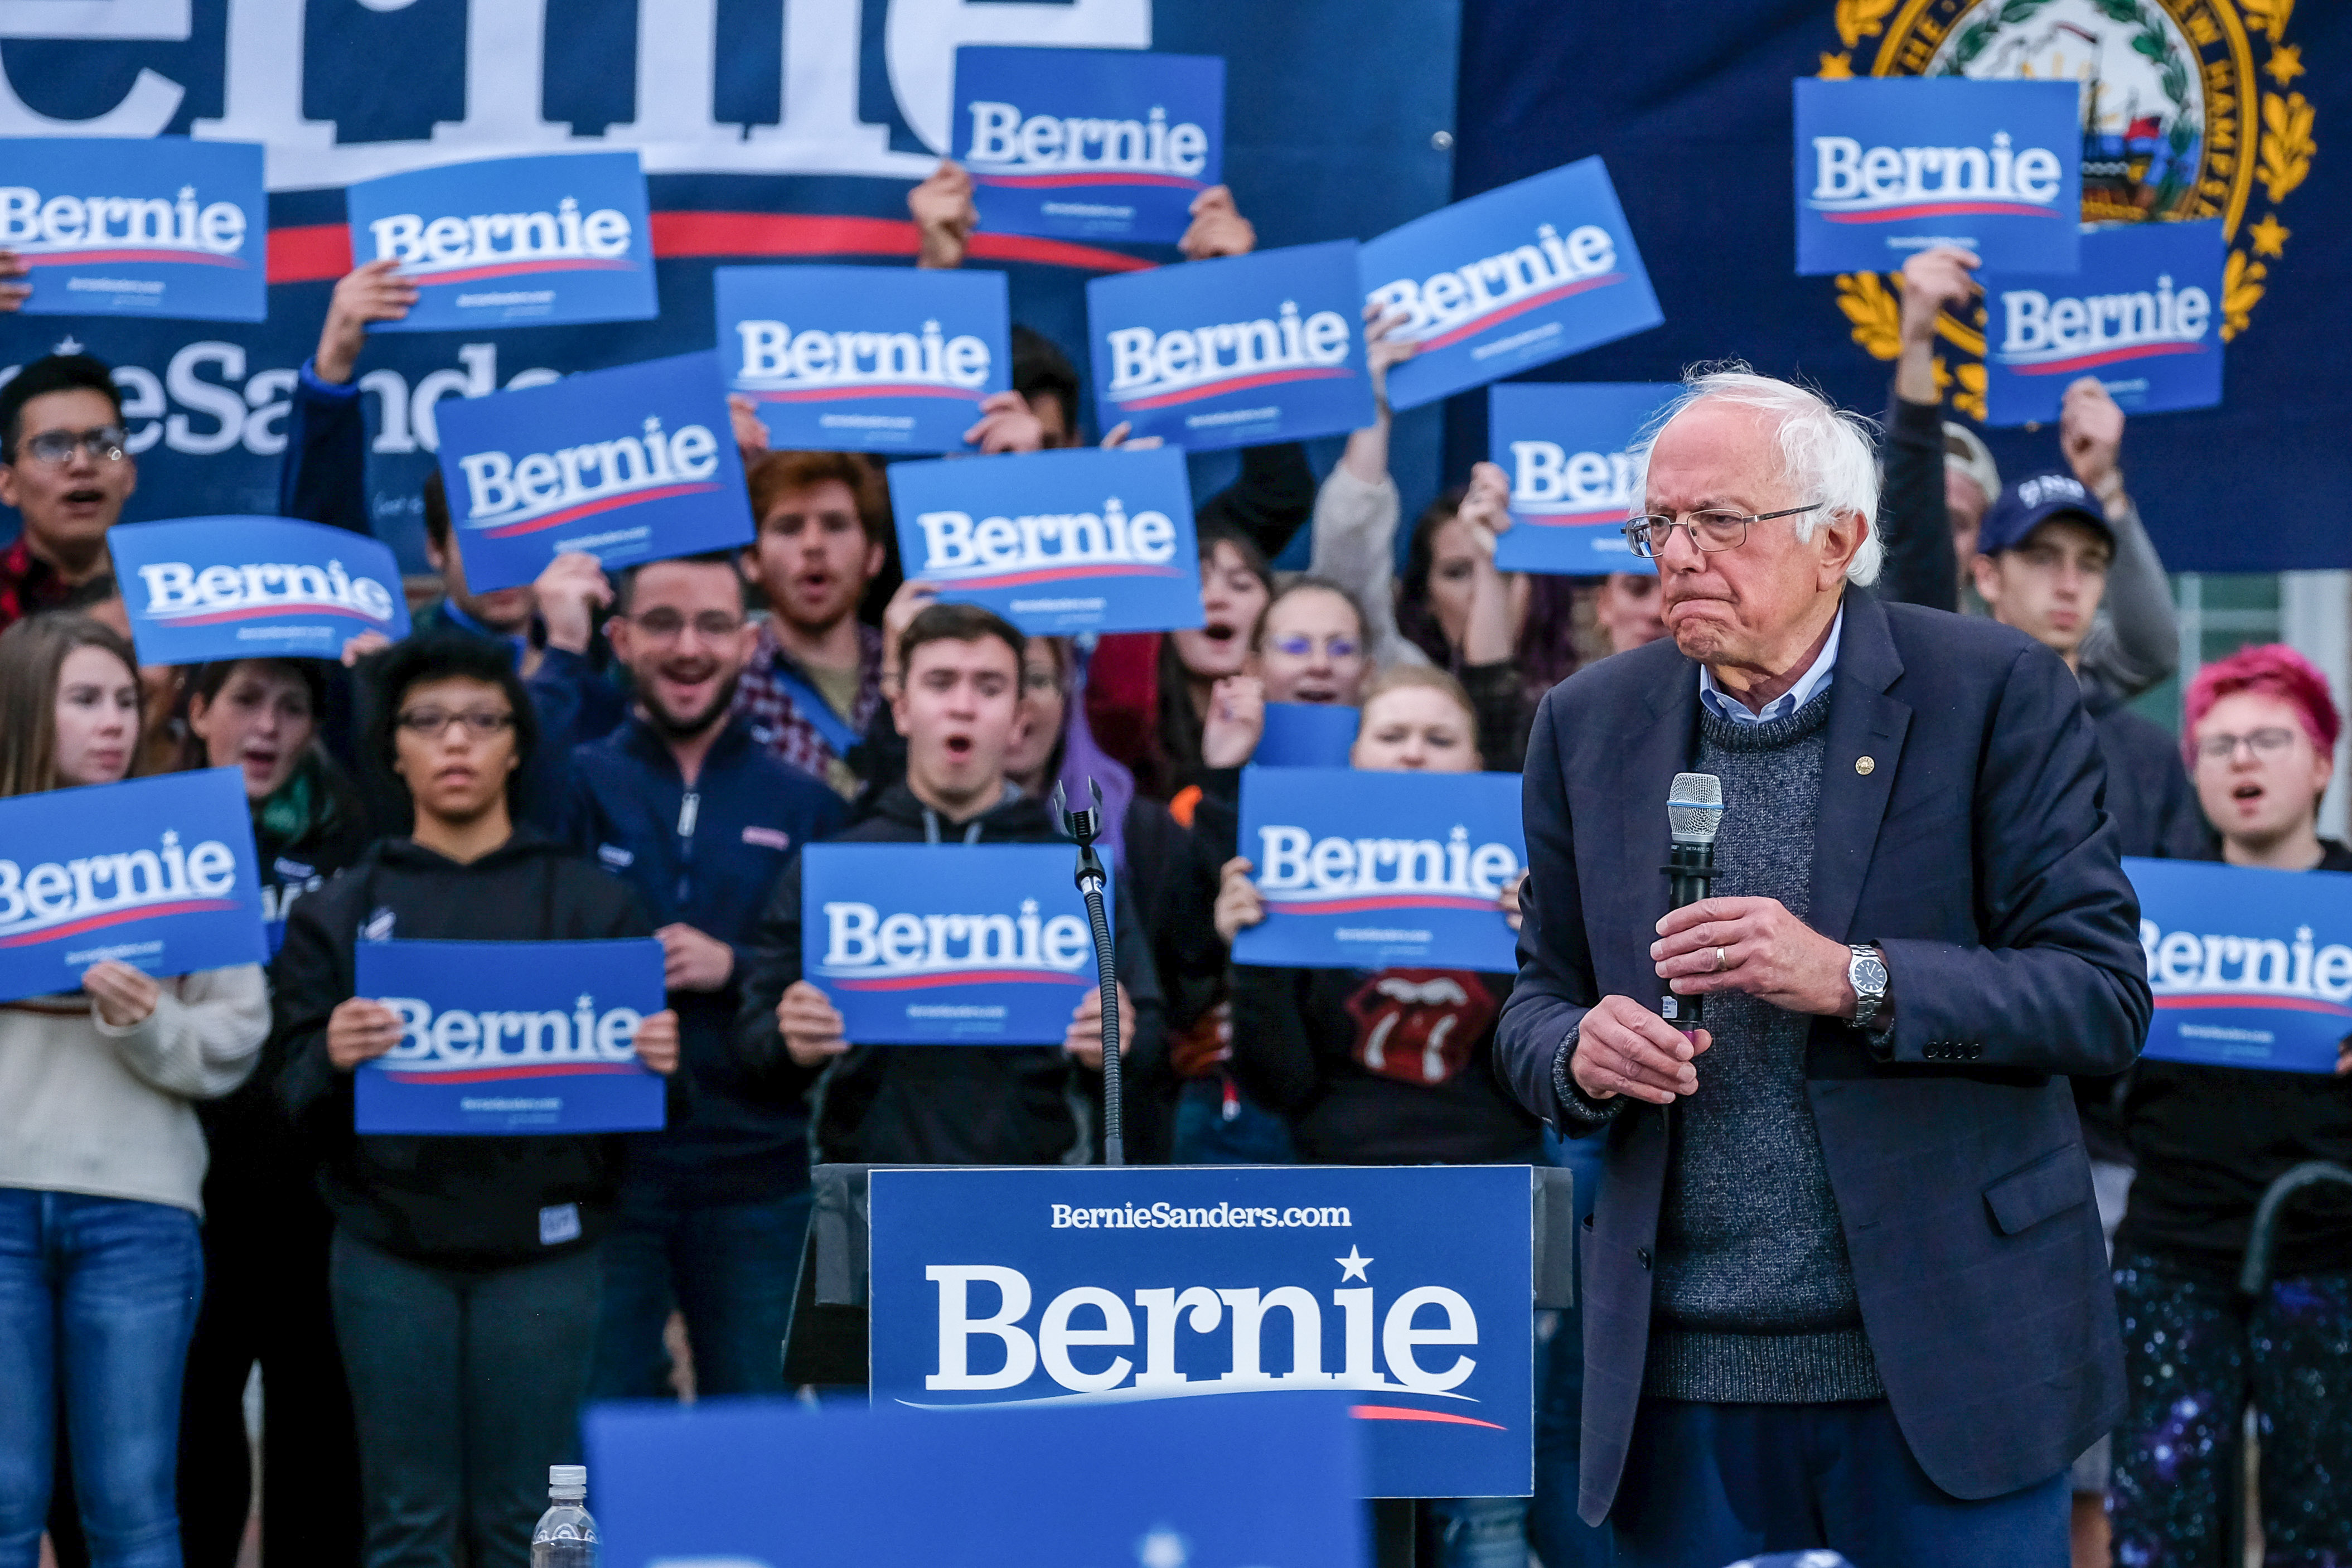 Vermont senator and presidential candidate Bernie Sanders campaigns at the University of New Hampshire on Sept. 30, 2019. (Preston Ehrler&mdash;SOPA Images/LightRocket/Getty Images)